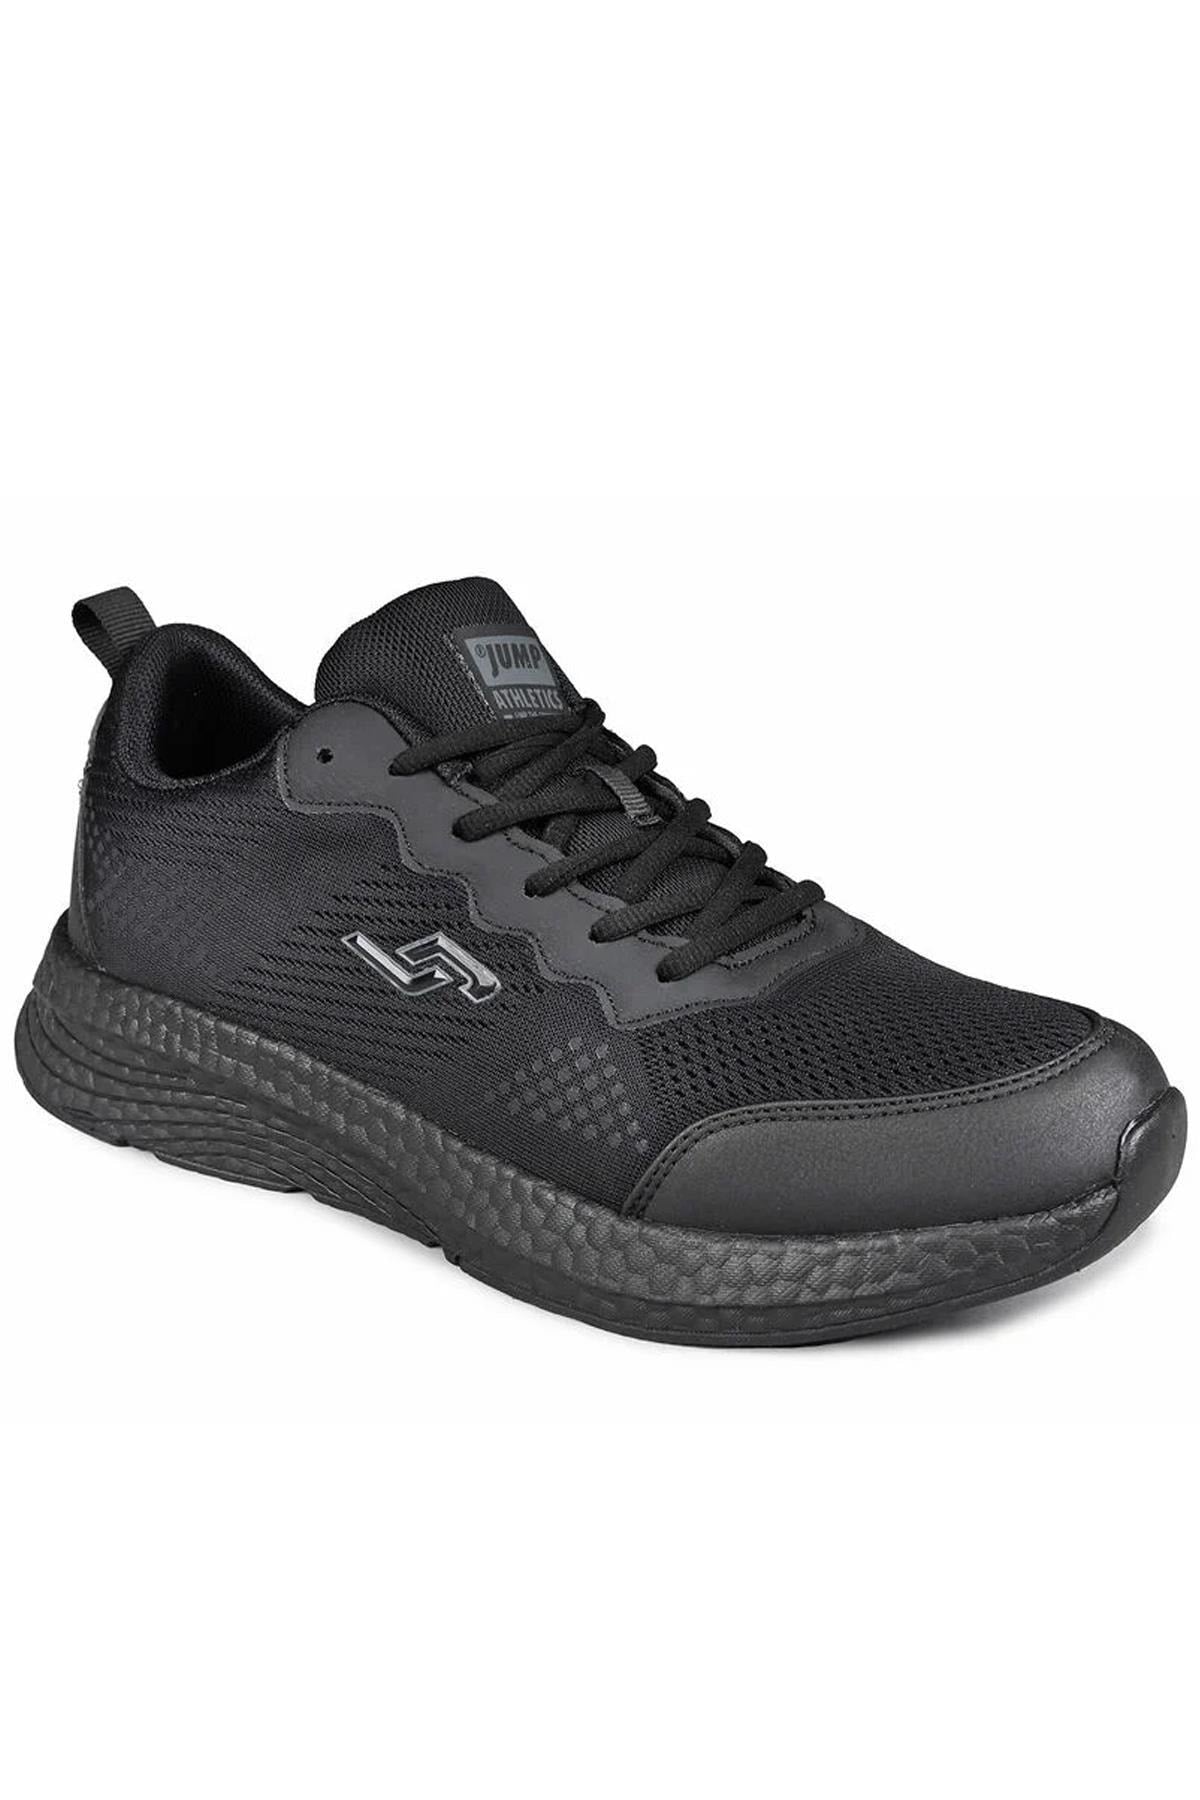 27689 Comfort Large Size Men's Sneakers Running Shoes